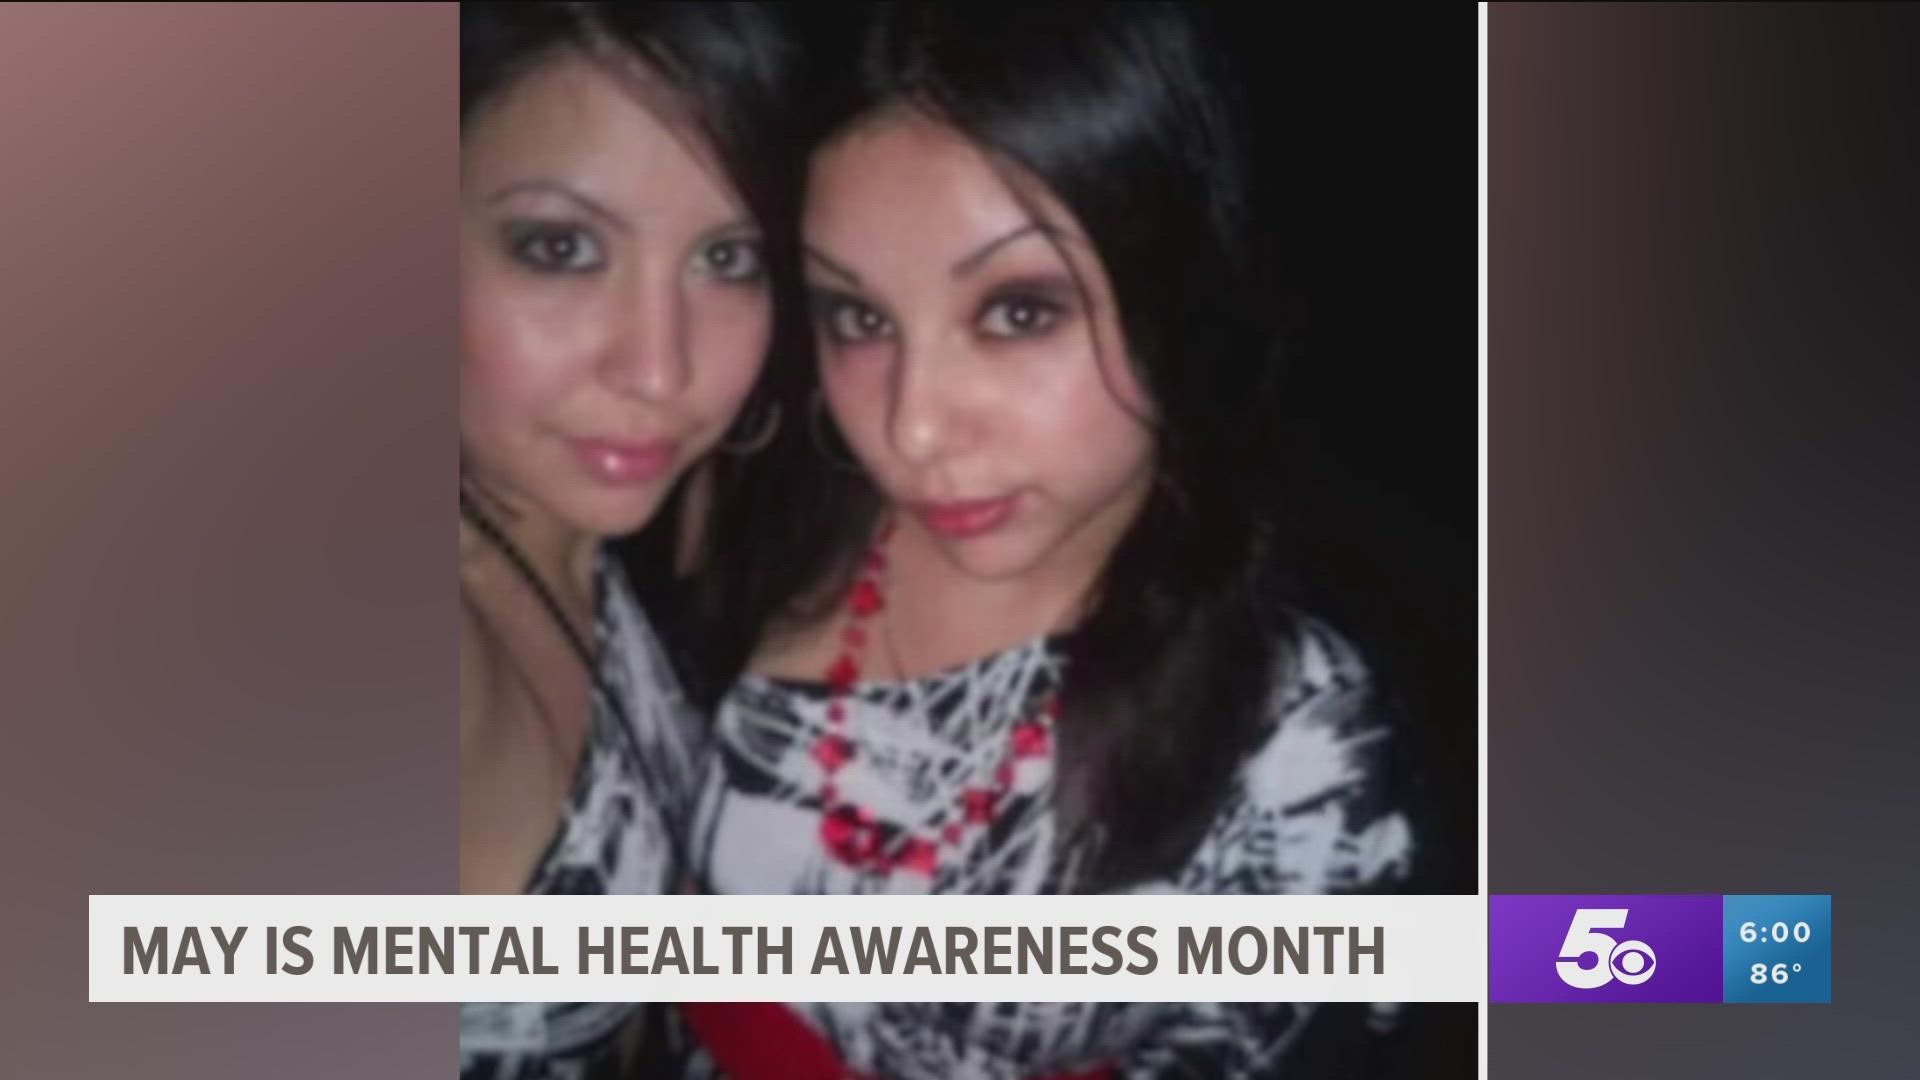 A Fort Smith mom who lost two daughters to suicide hopes sharing their stories will raise awareness about mental health struggles.